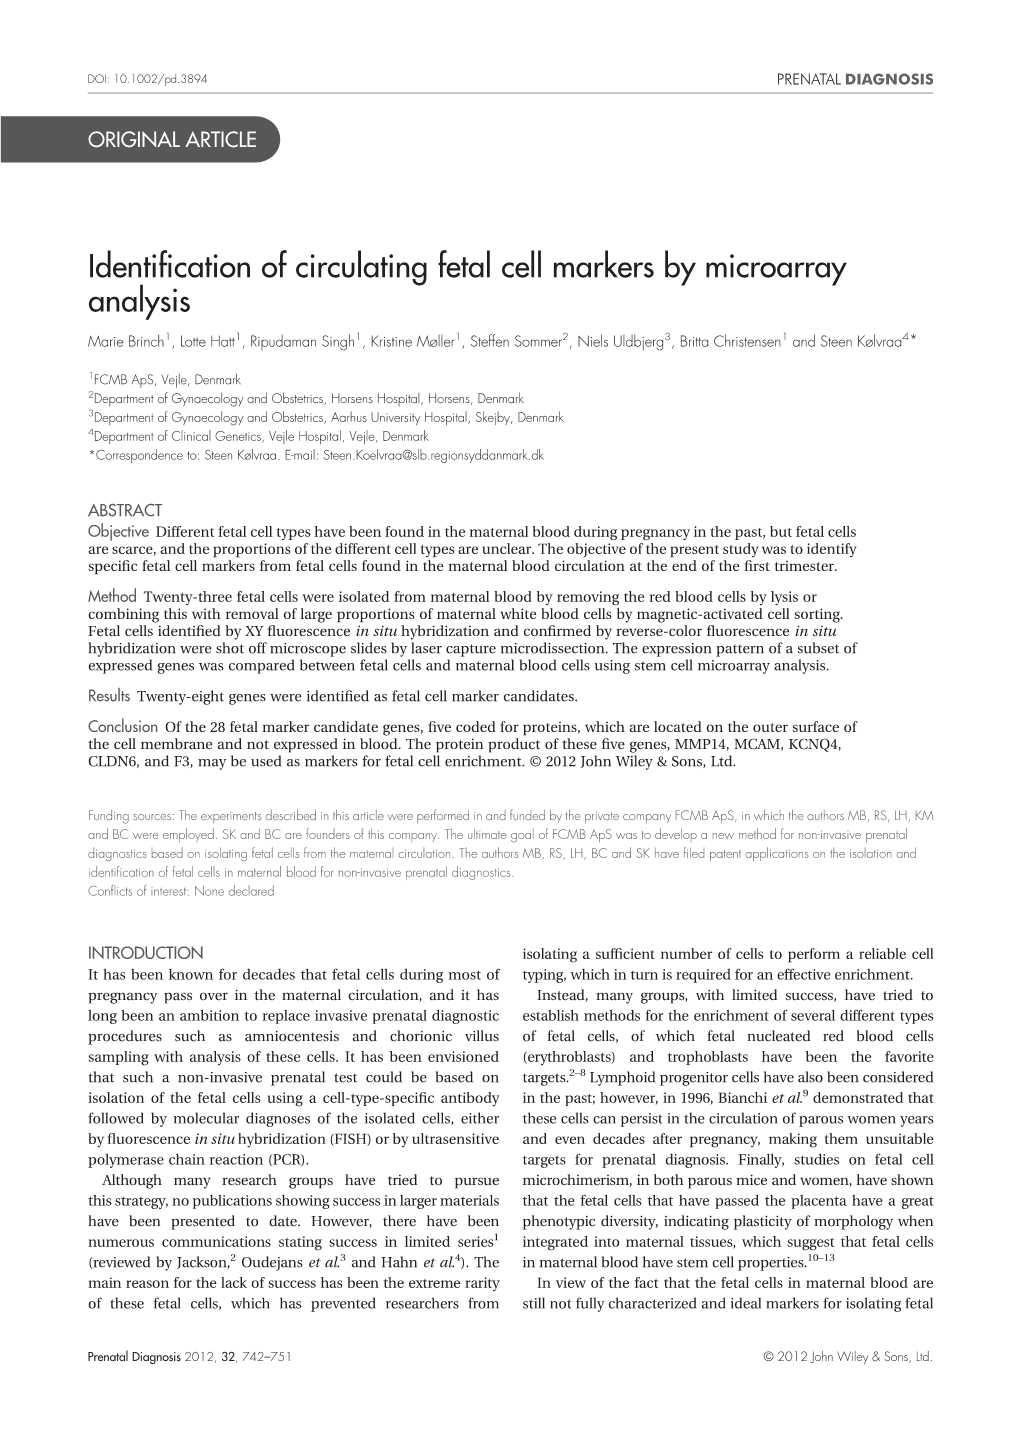 Identification of Circulating Fetal Cell Markers by Microarray Analysis